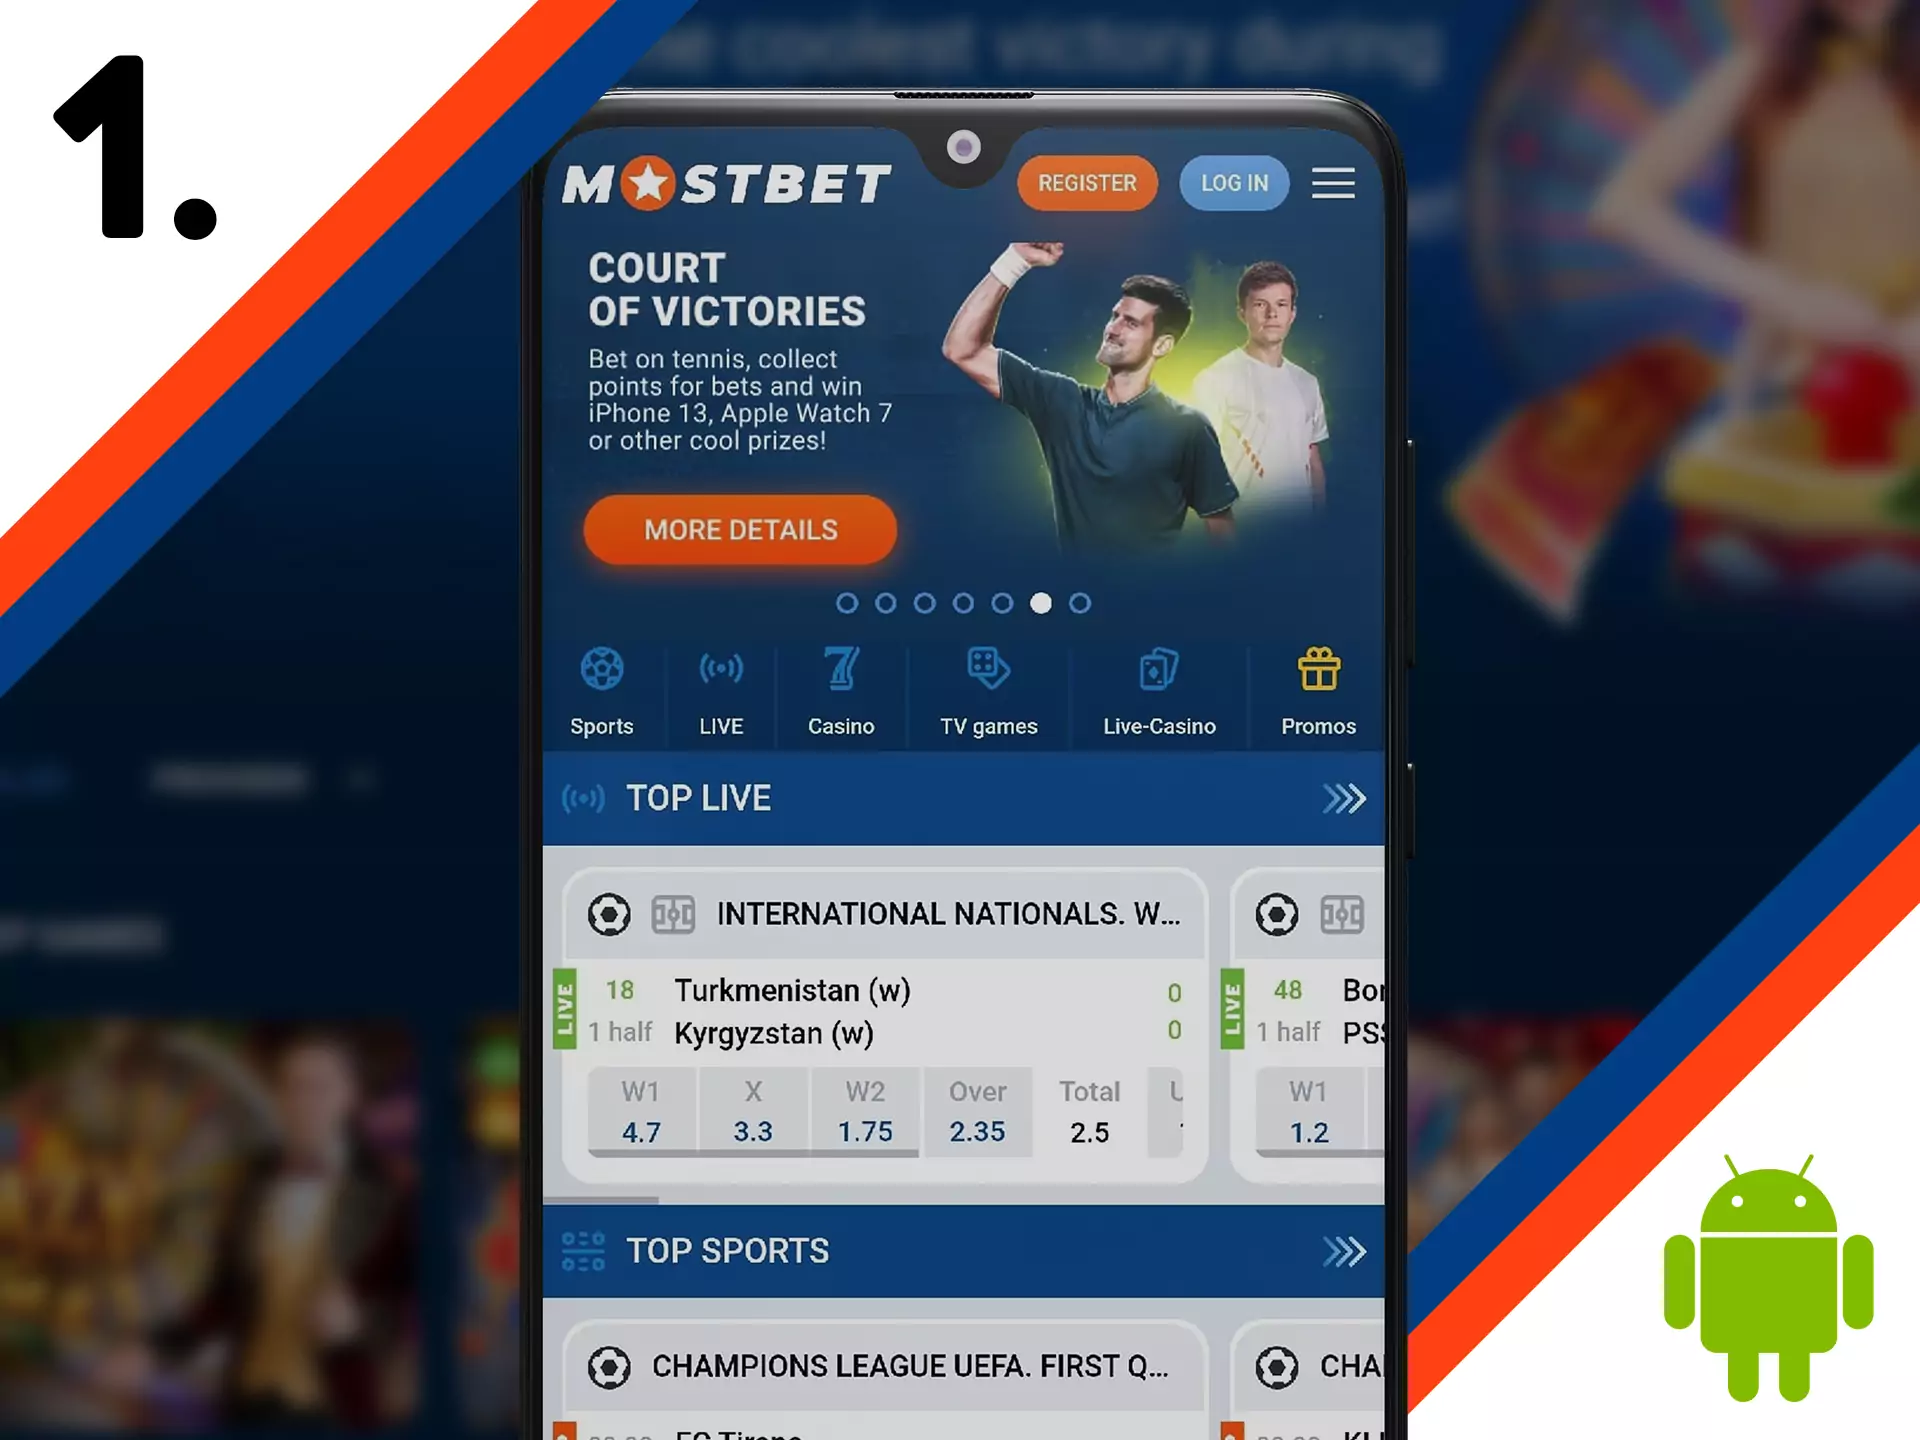 Enter the main page of Mostbet website.